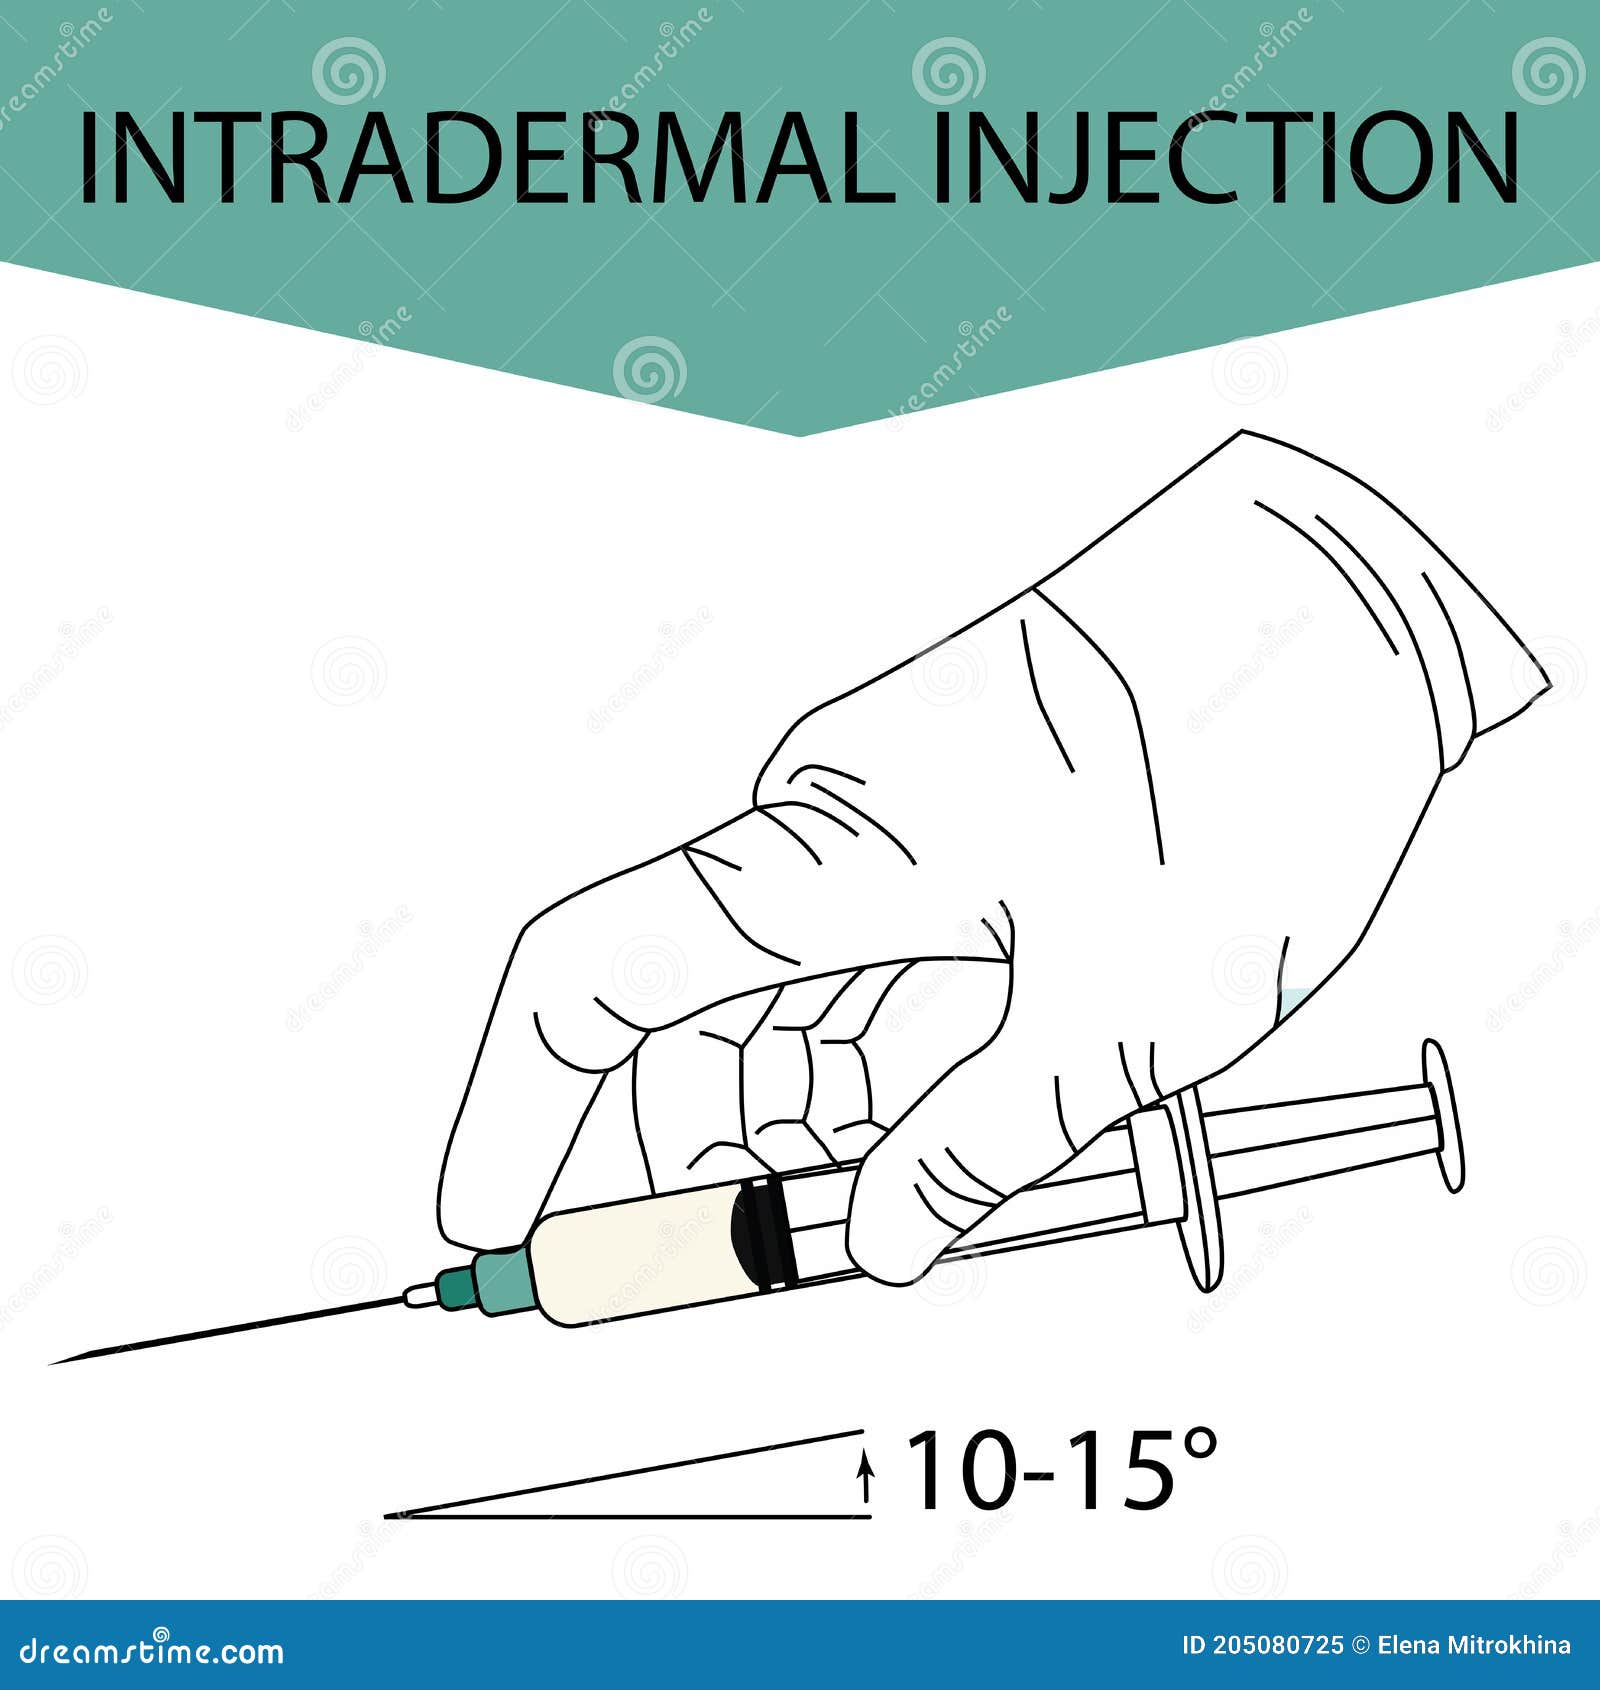 intradermal injection. effective methods of administration of drugs and other medical solutions that are used for humans and